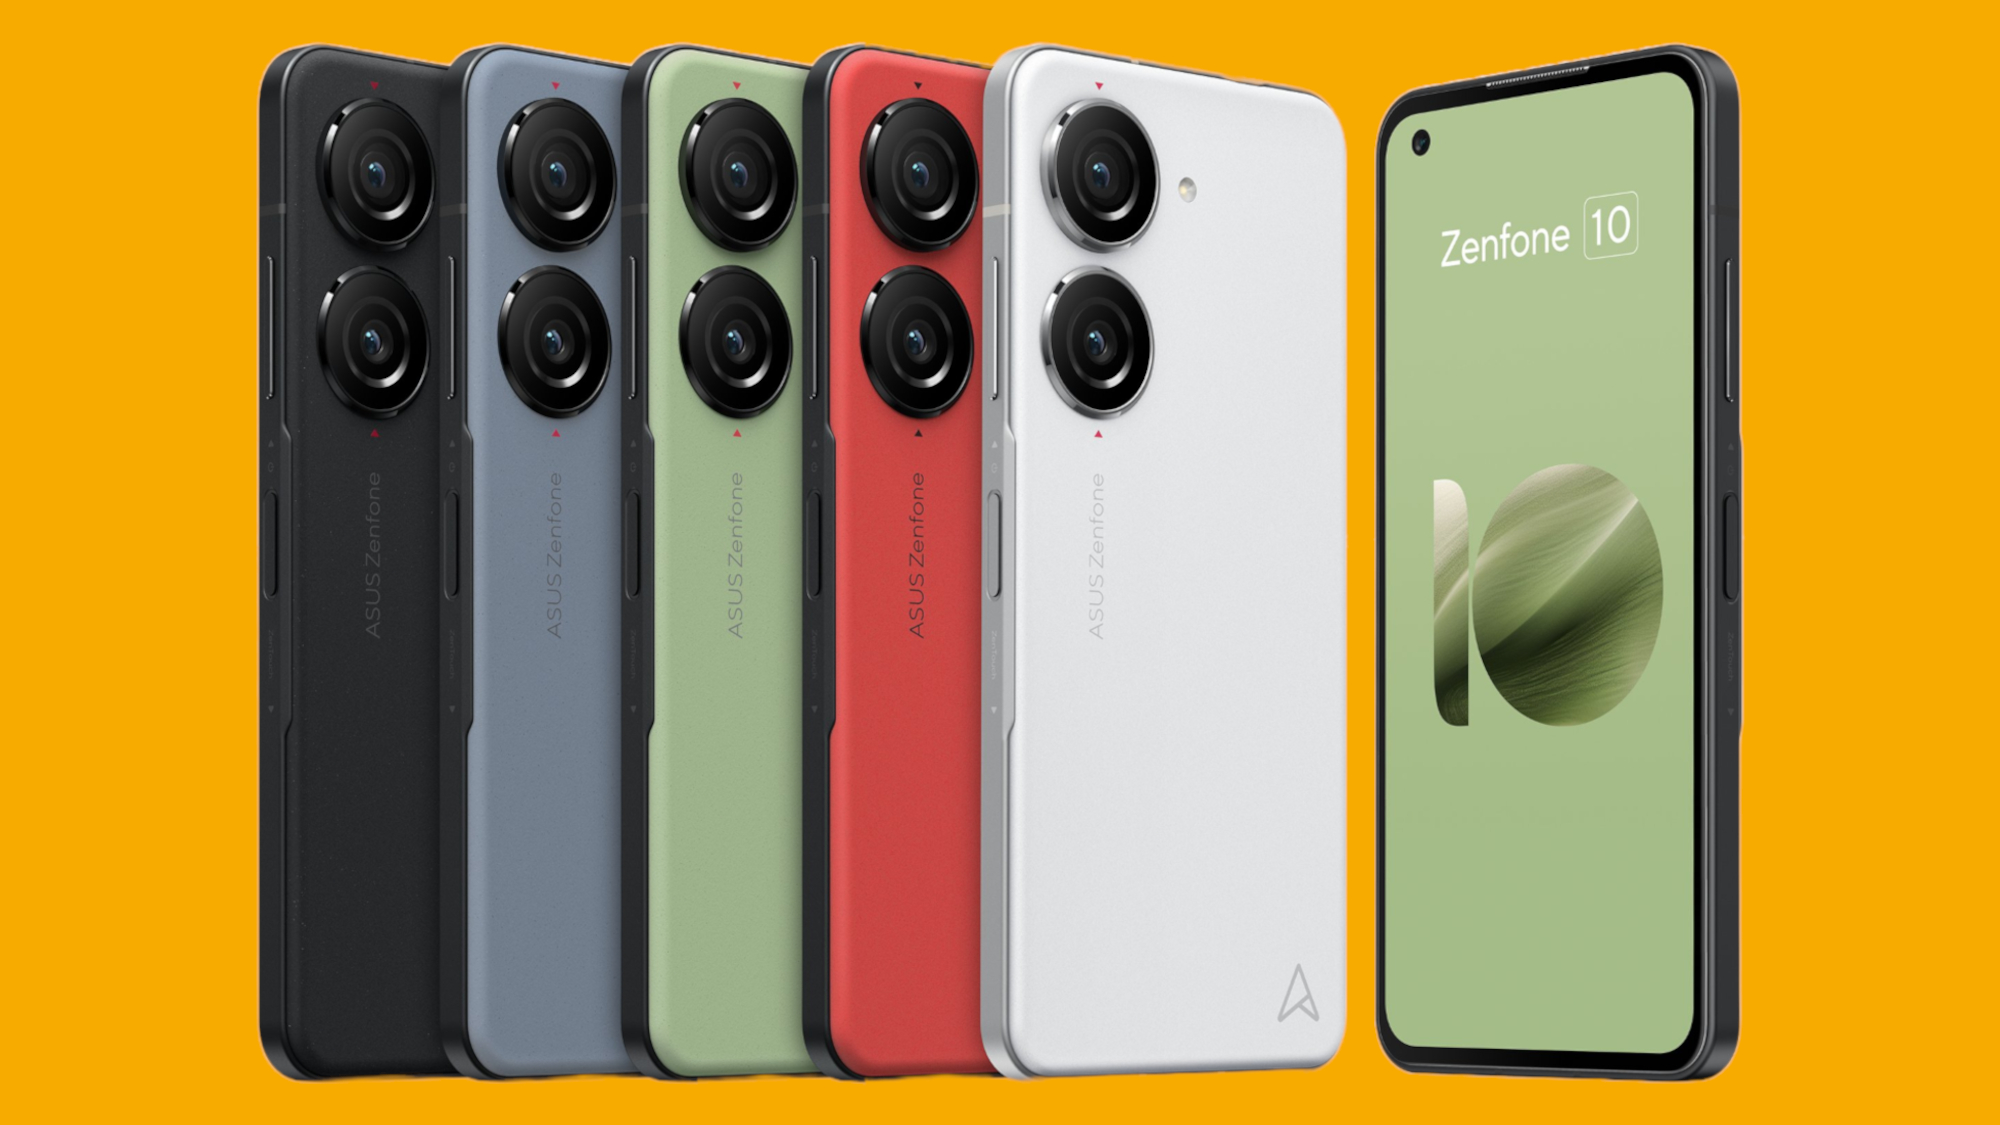 Asus Zenfone 10 models lined up on a yellow background